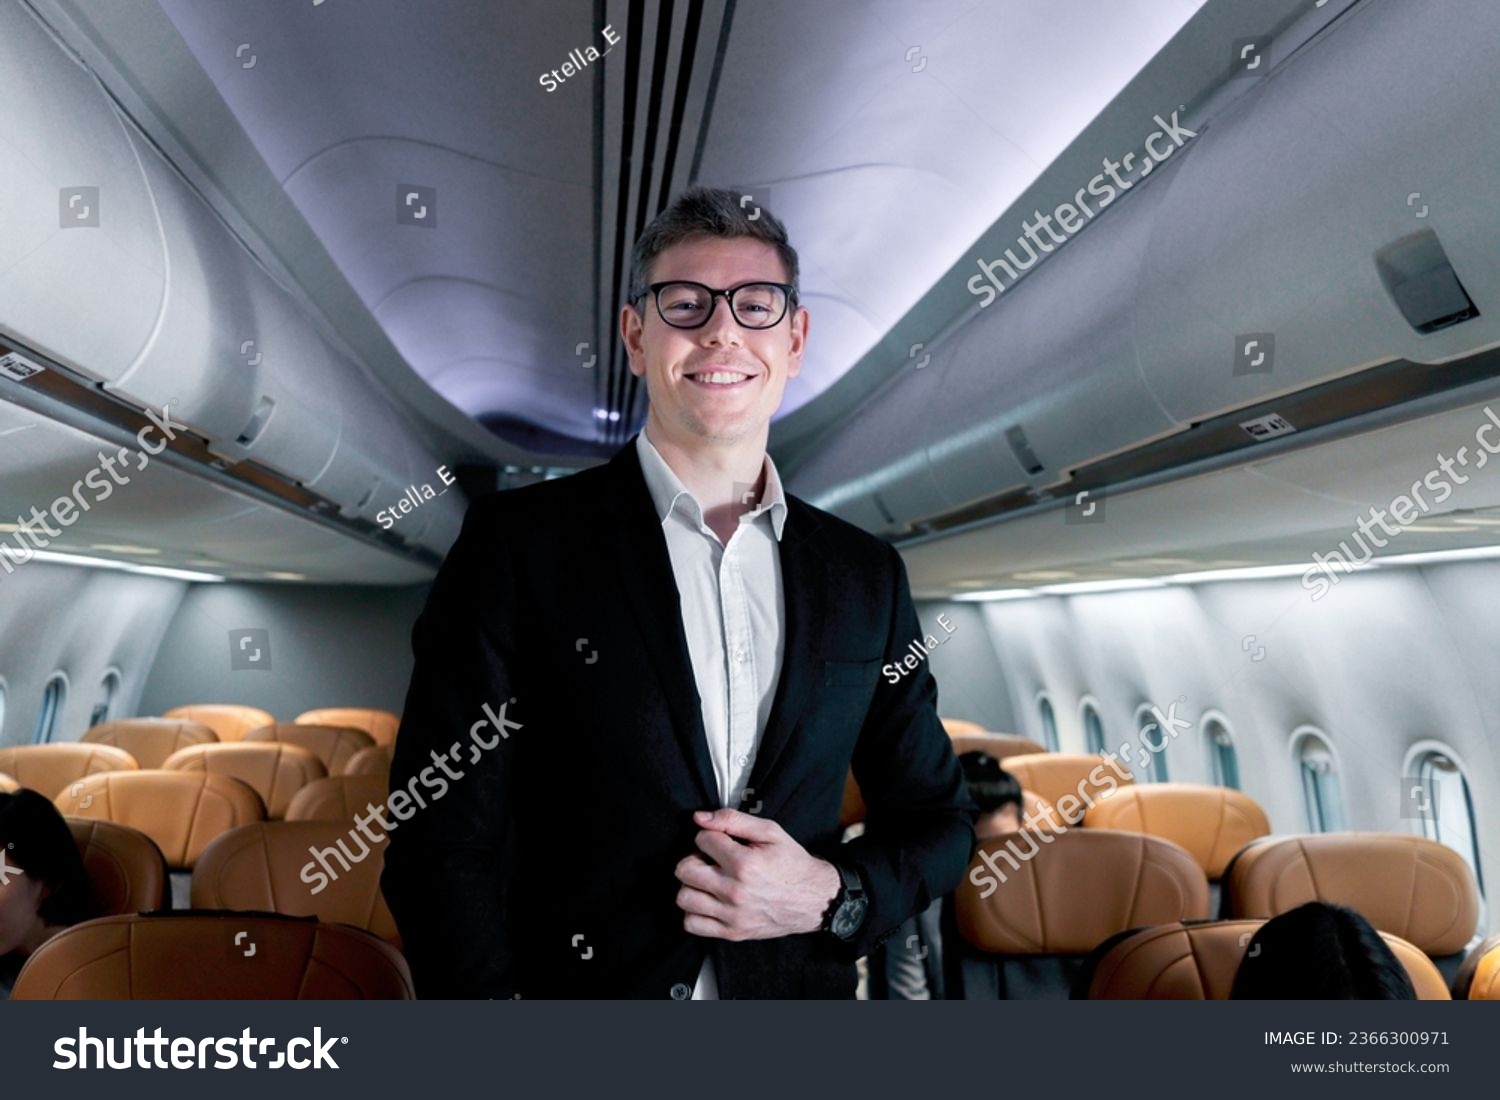 Portrait of happy smiling businessman in black suit, standing on aisle inside airplane, male passenger traveling on business trip by aircraft, businesspeople traveling with airline transportation. #2366300971